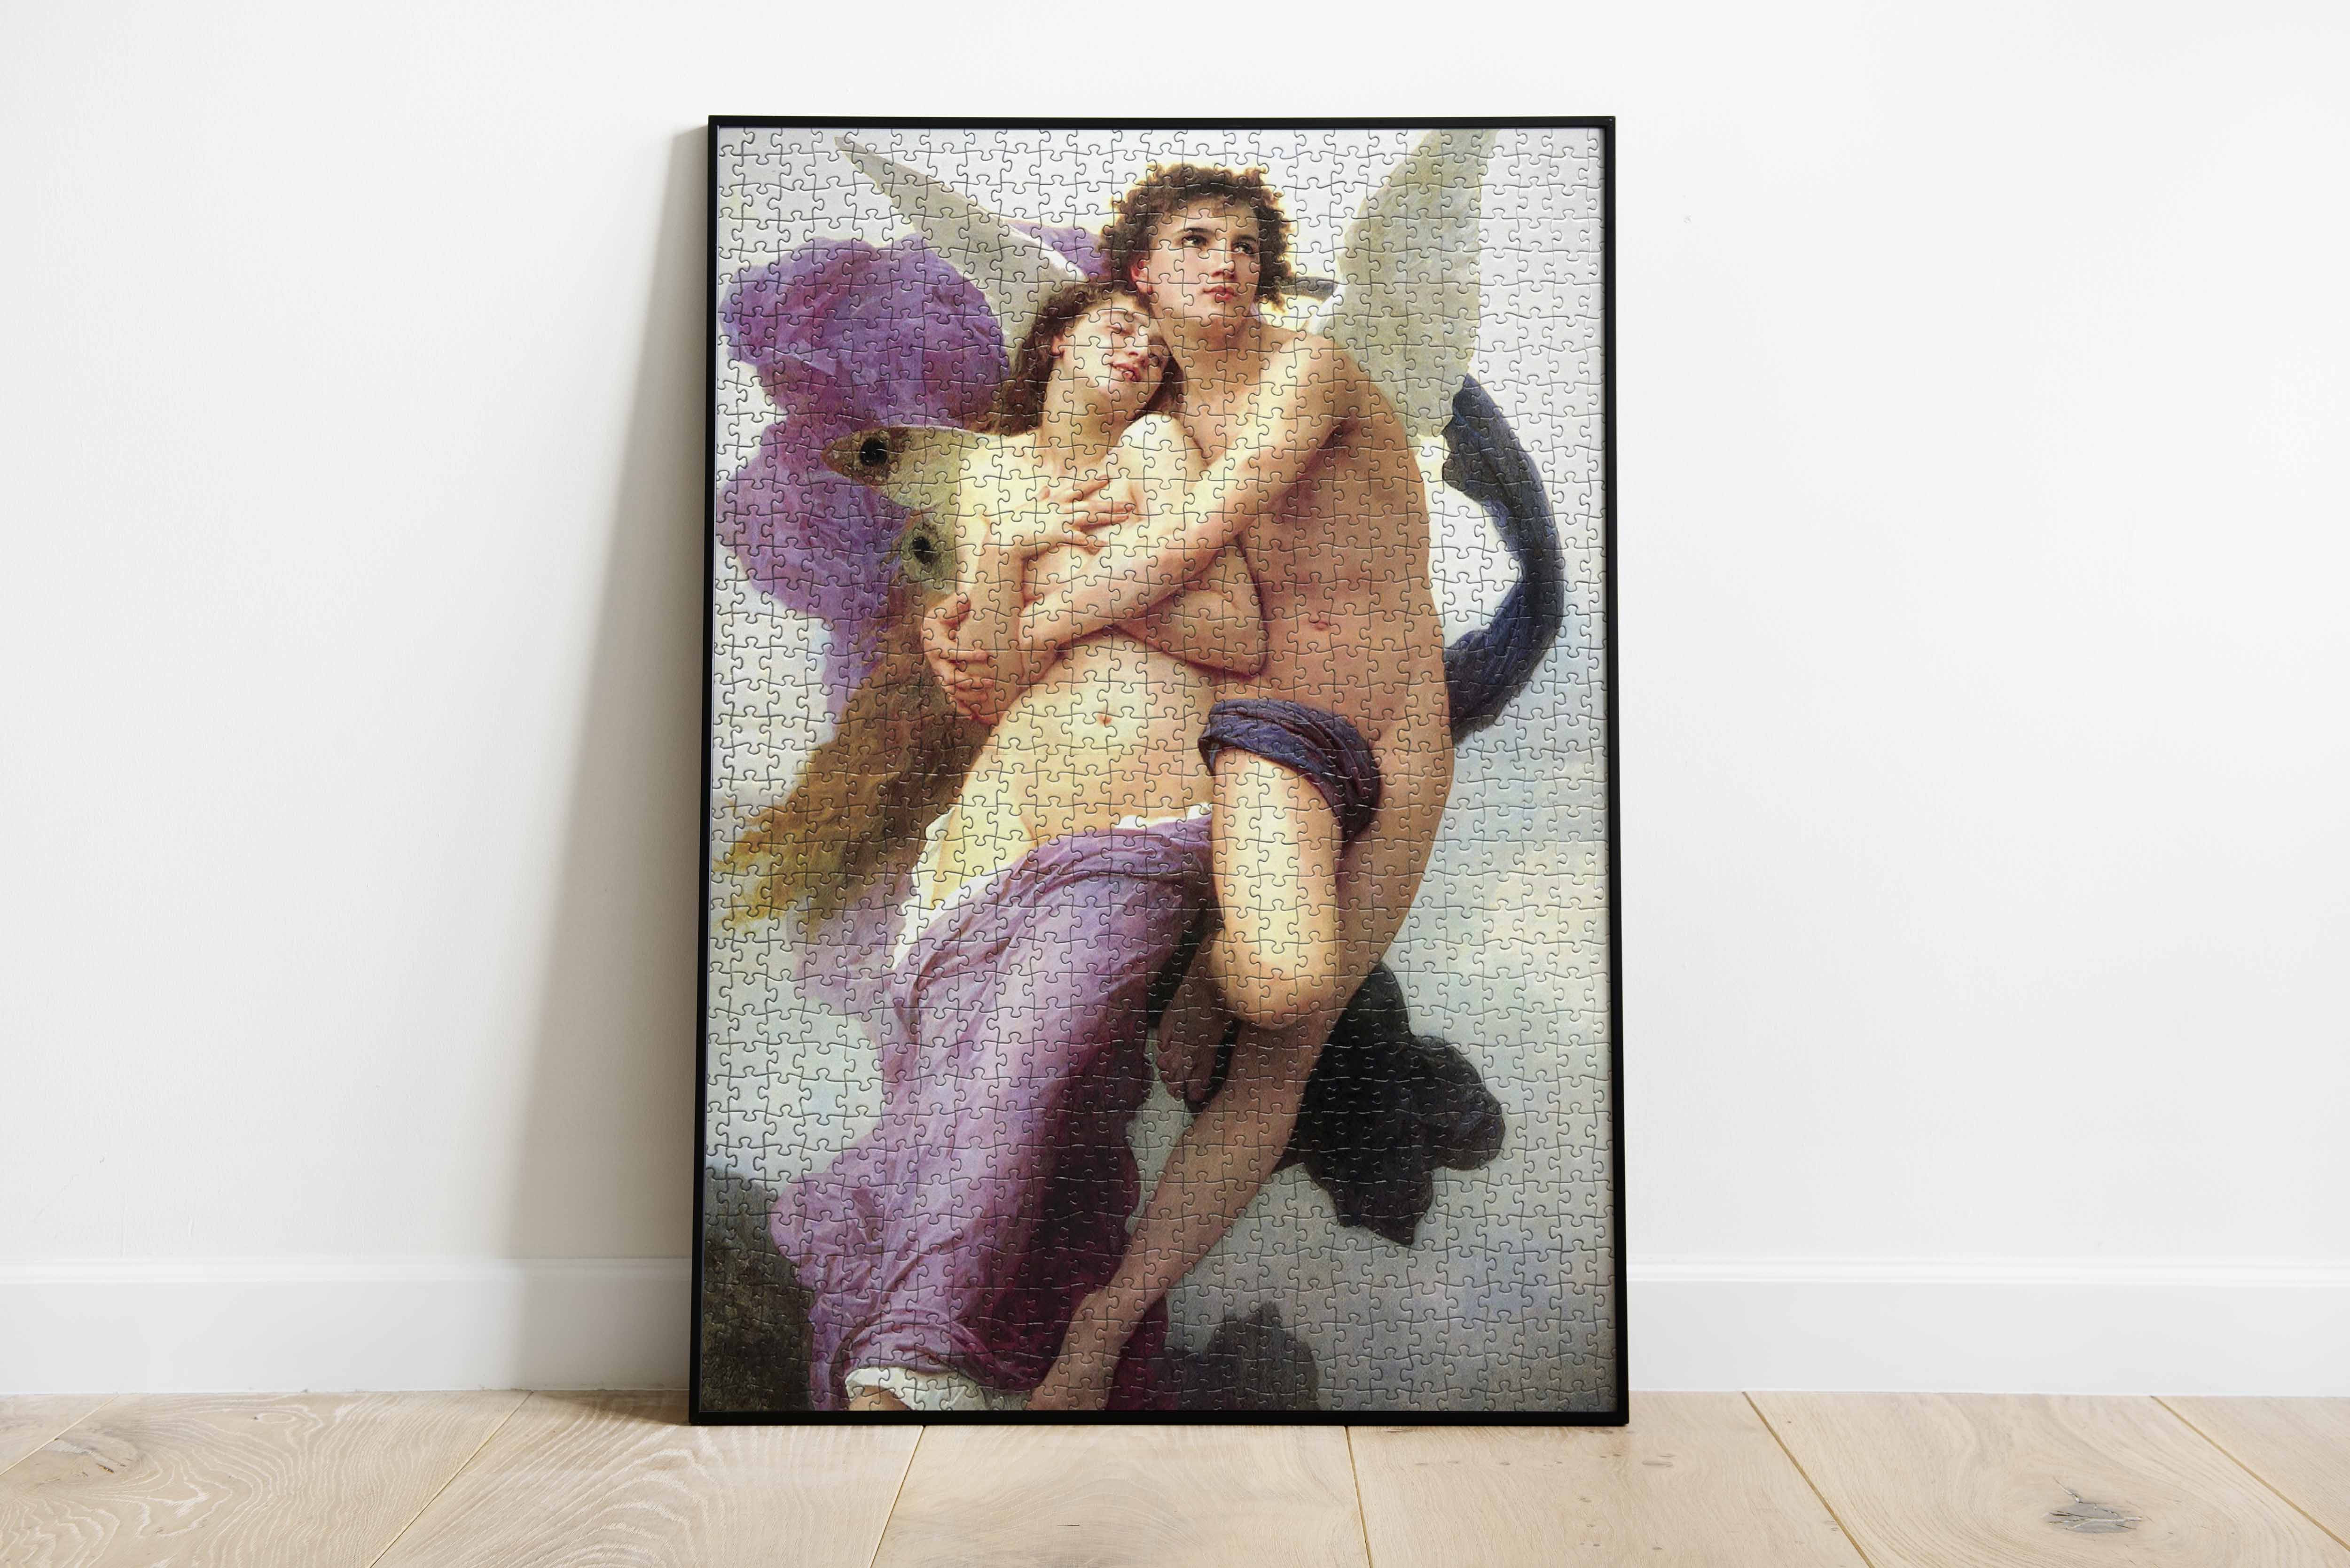 Eurographic's Fine Art Collection presents 'The Abduction of Psyche' jigsaw puzzle, a masterpiece for art enthusiasts and puzzle lovers alike